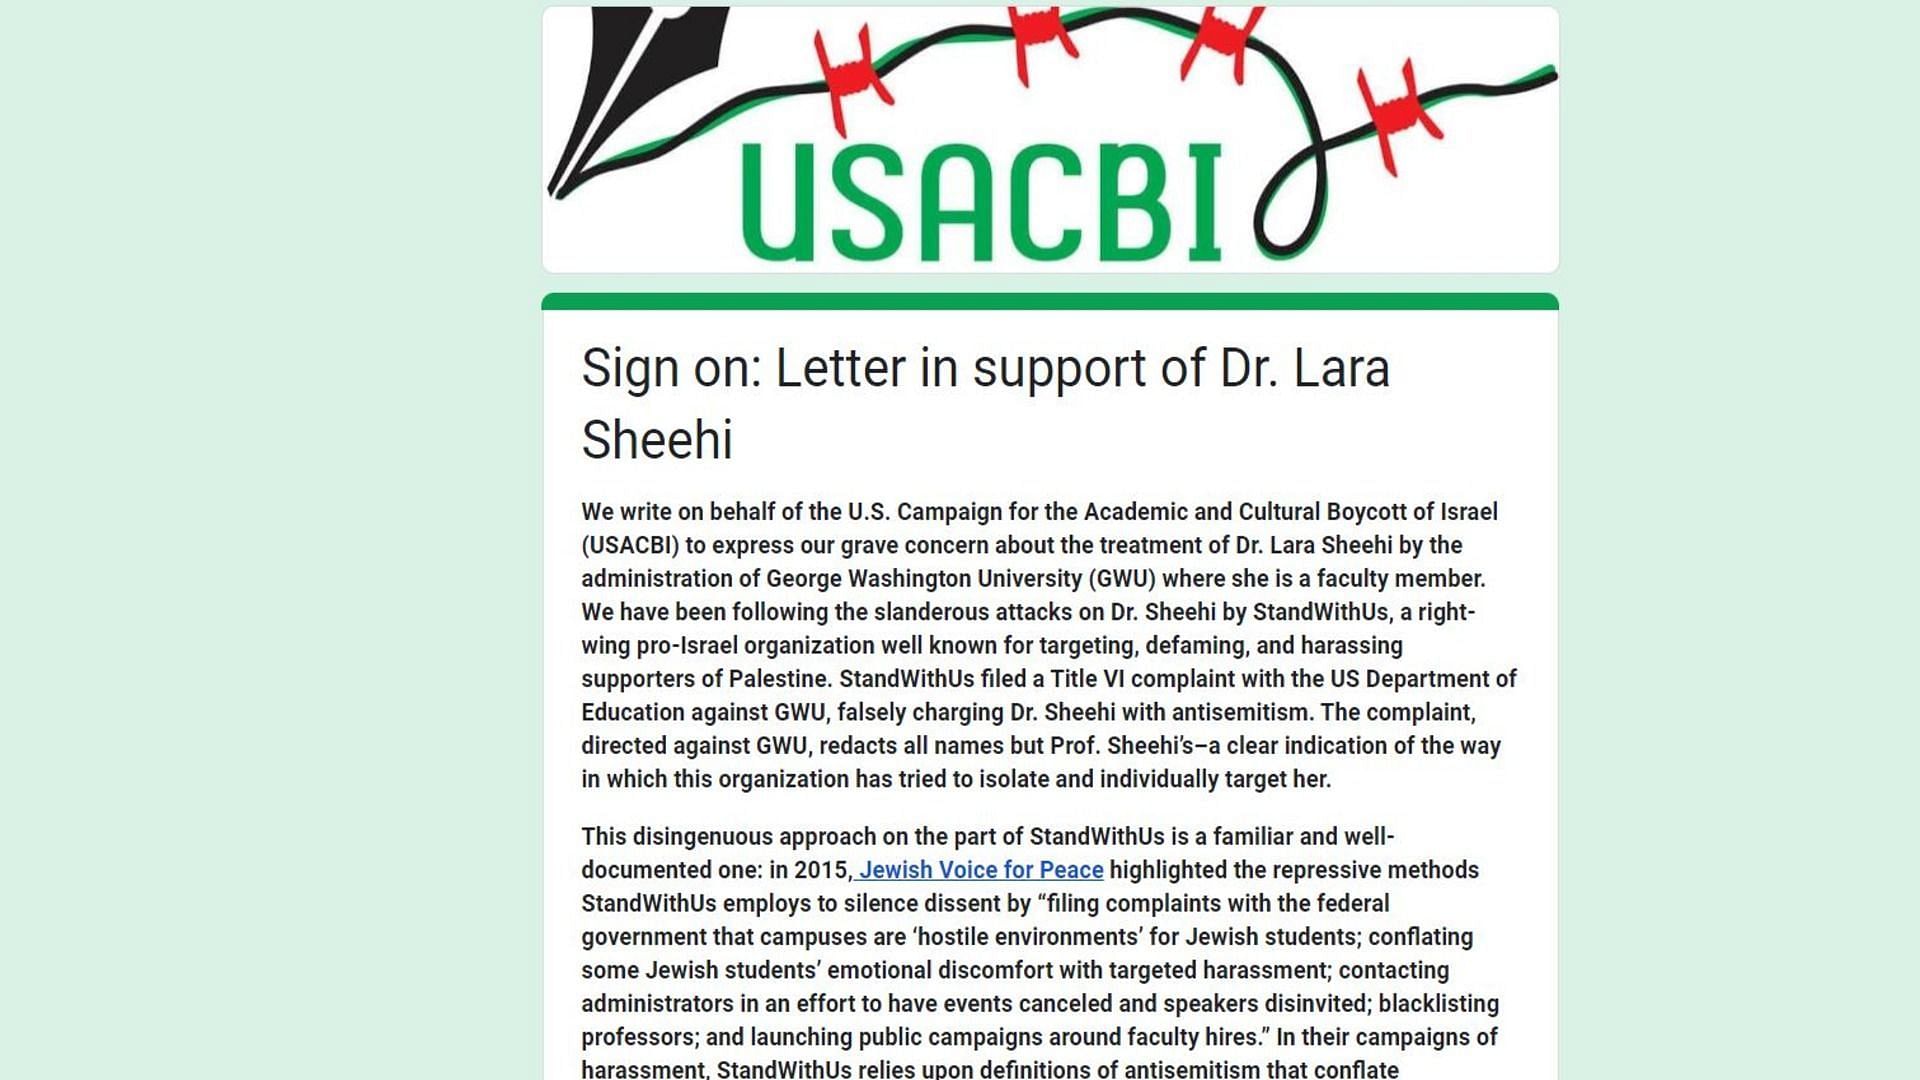 Sign on: Letter in support of Dr. Sheehi (Image via snip from Google Docs)